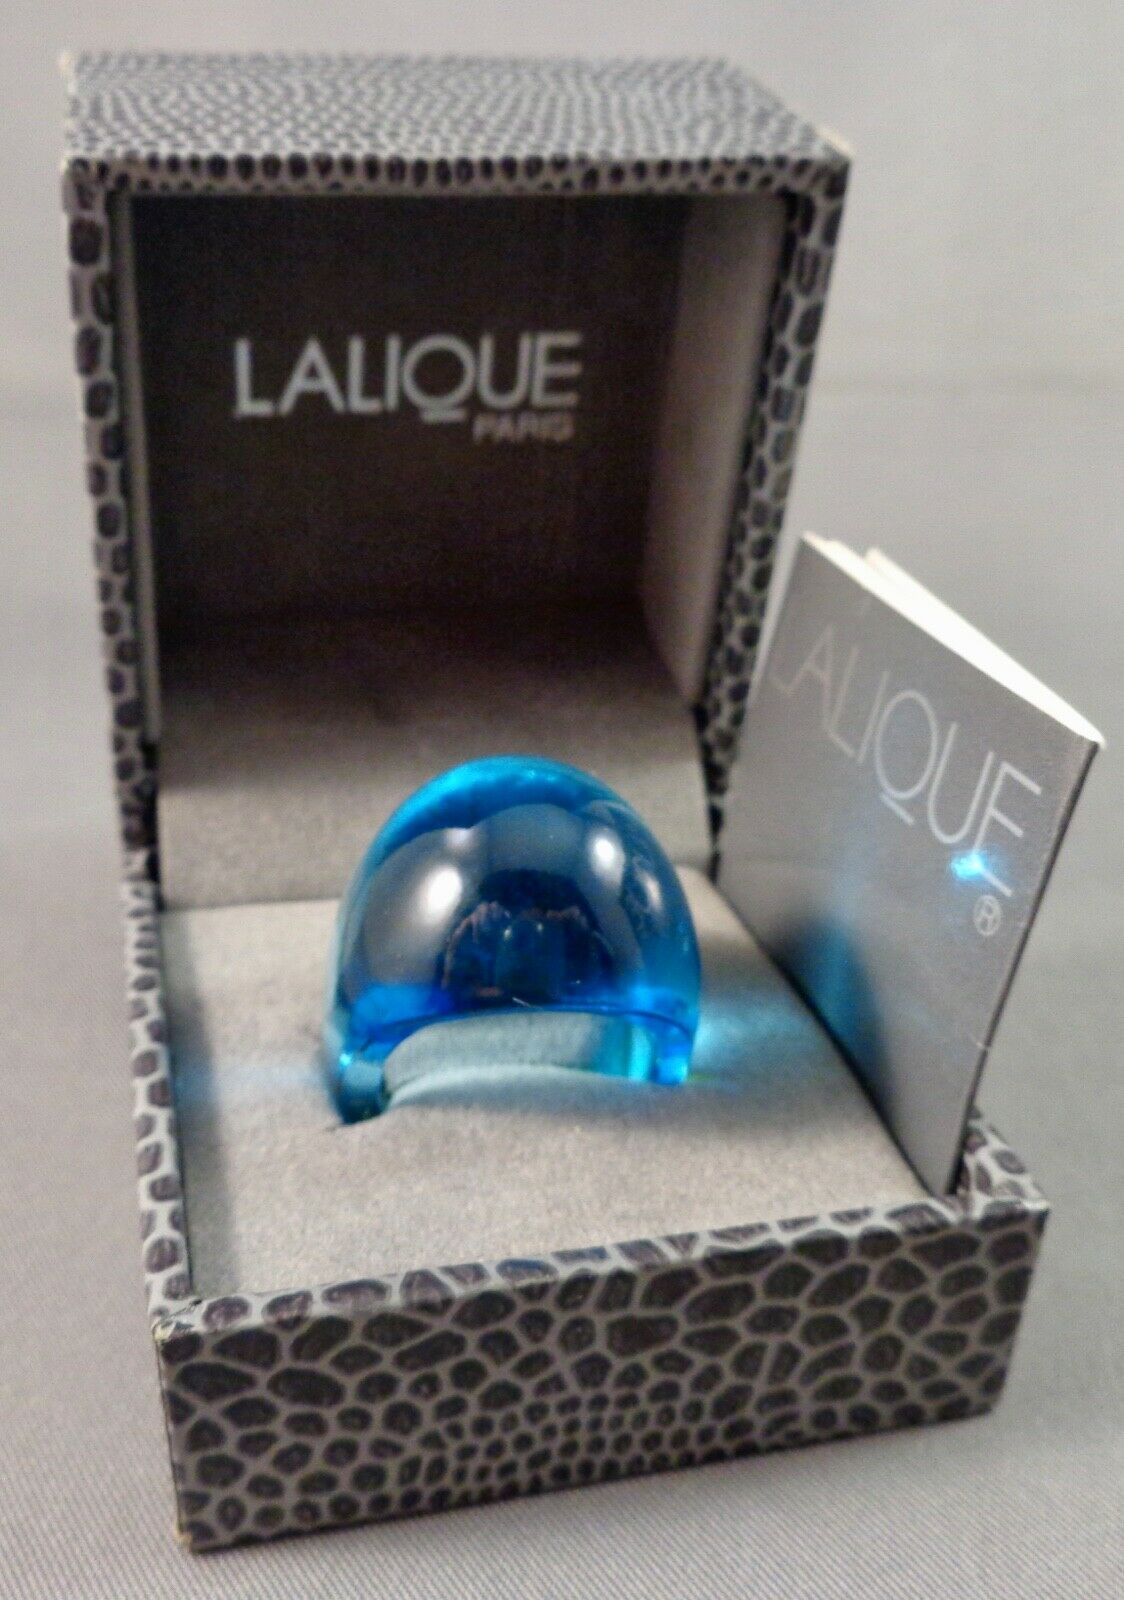 Peacock Blue Lalique Bague Gourmande Ring Original Box Signed Lovely Look